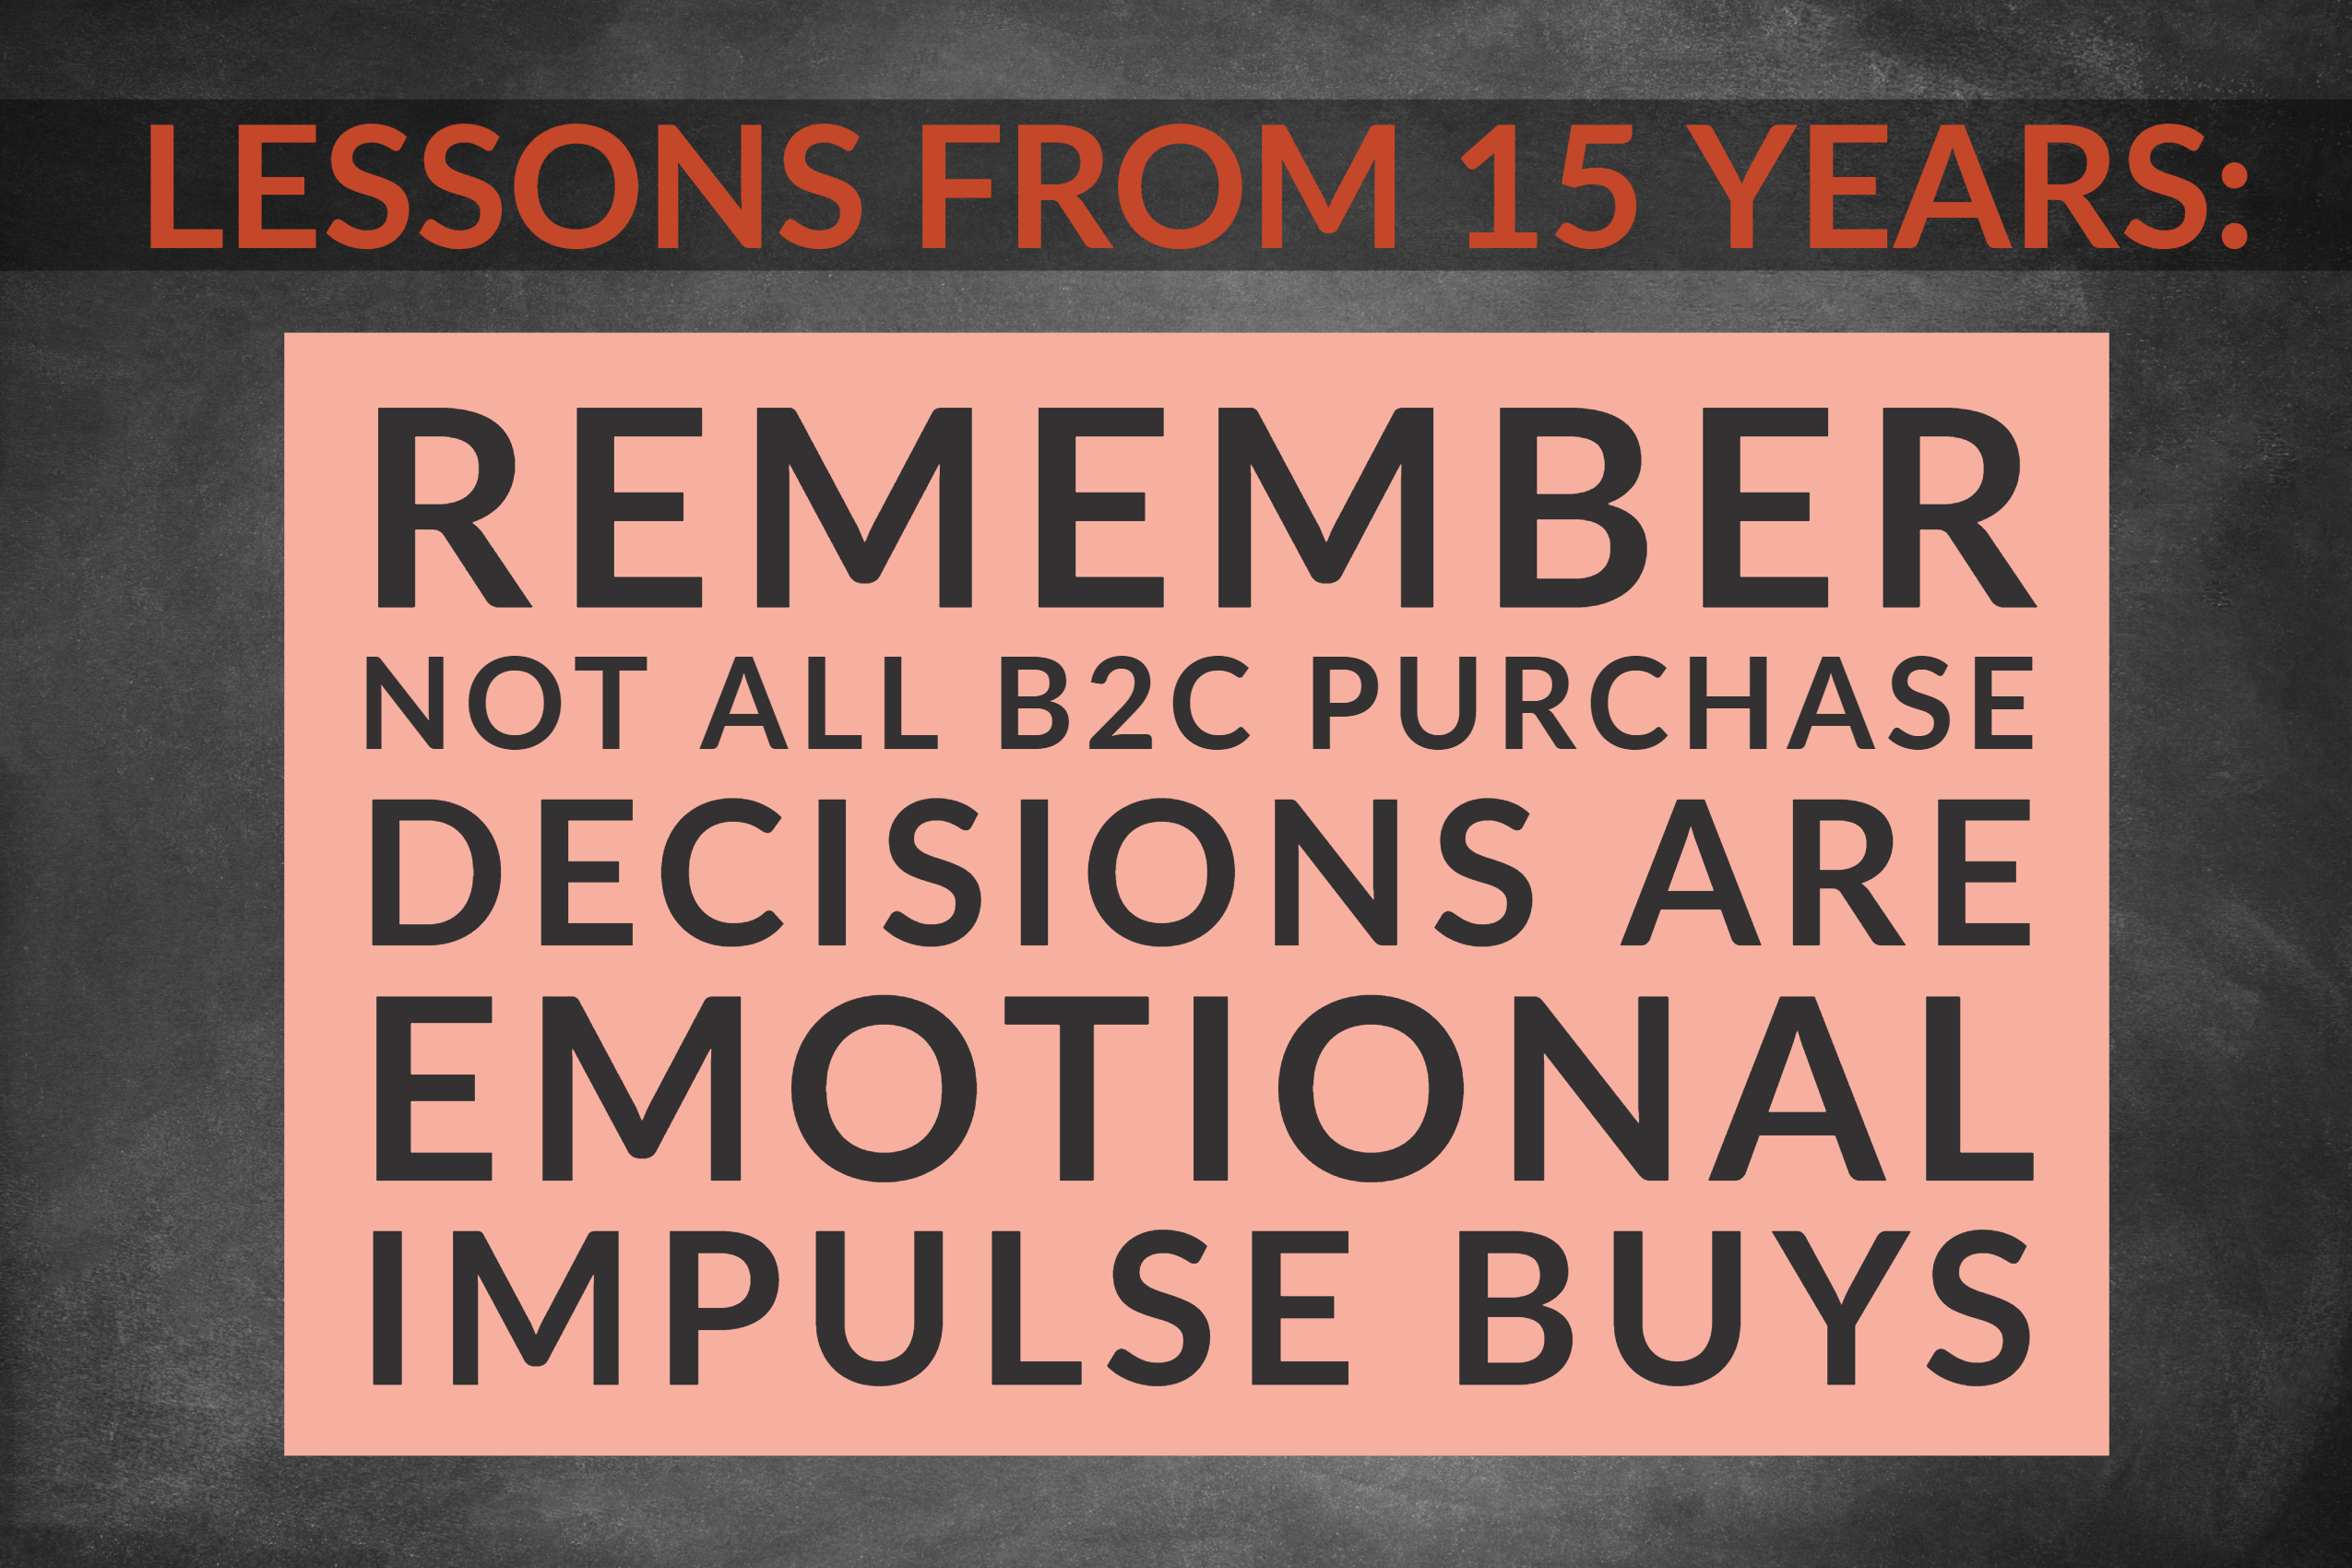 Lessons From 15 Years: Remember Not All B2C Purchase Decisions Are Emotional Impulse Buys